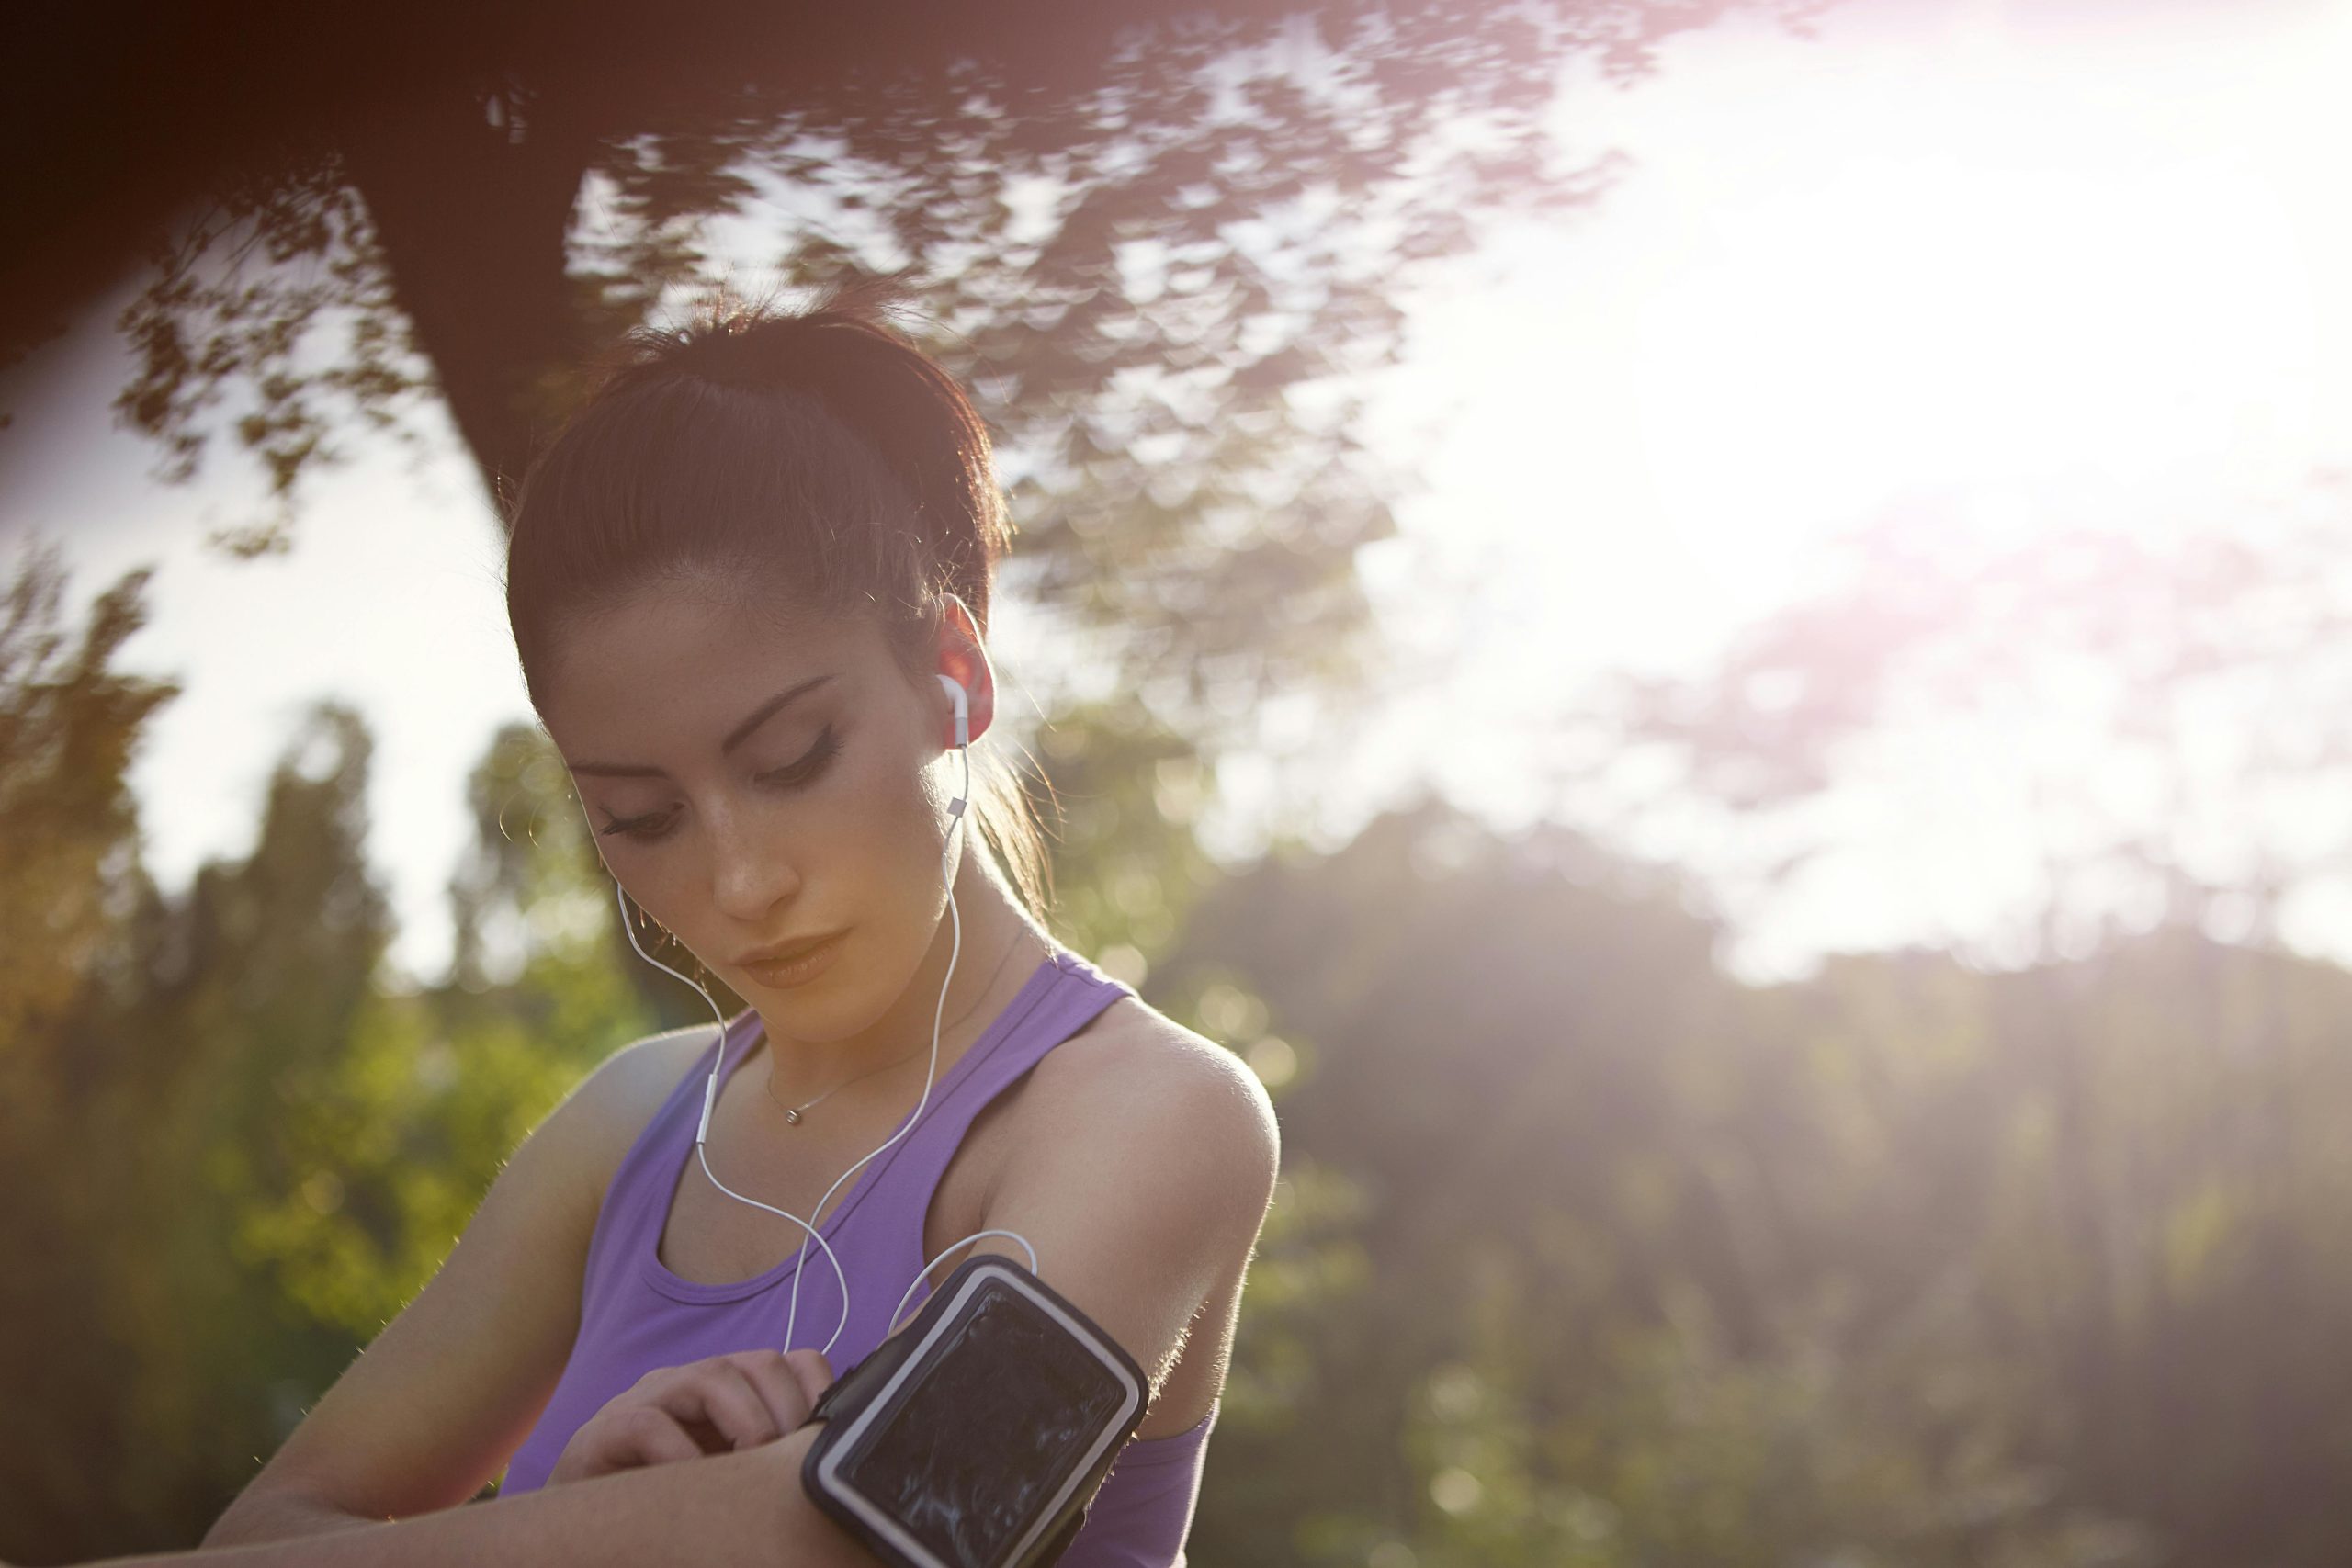 Woman checks fitness tracker during a workout outdoors at sunset.